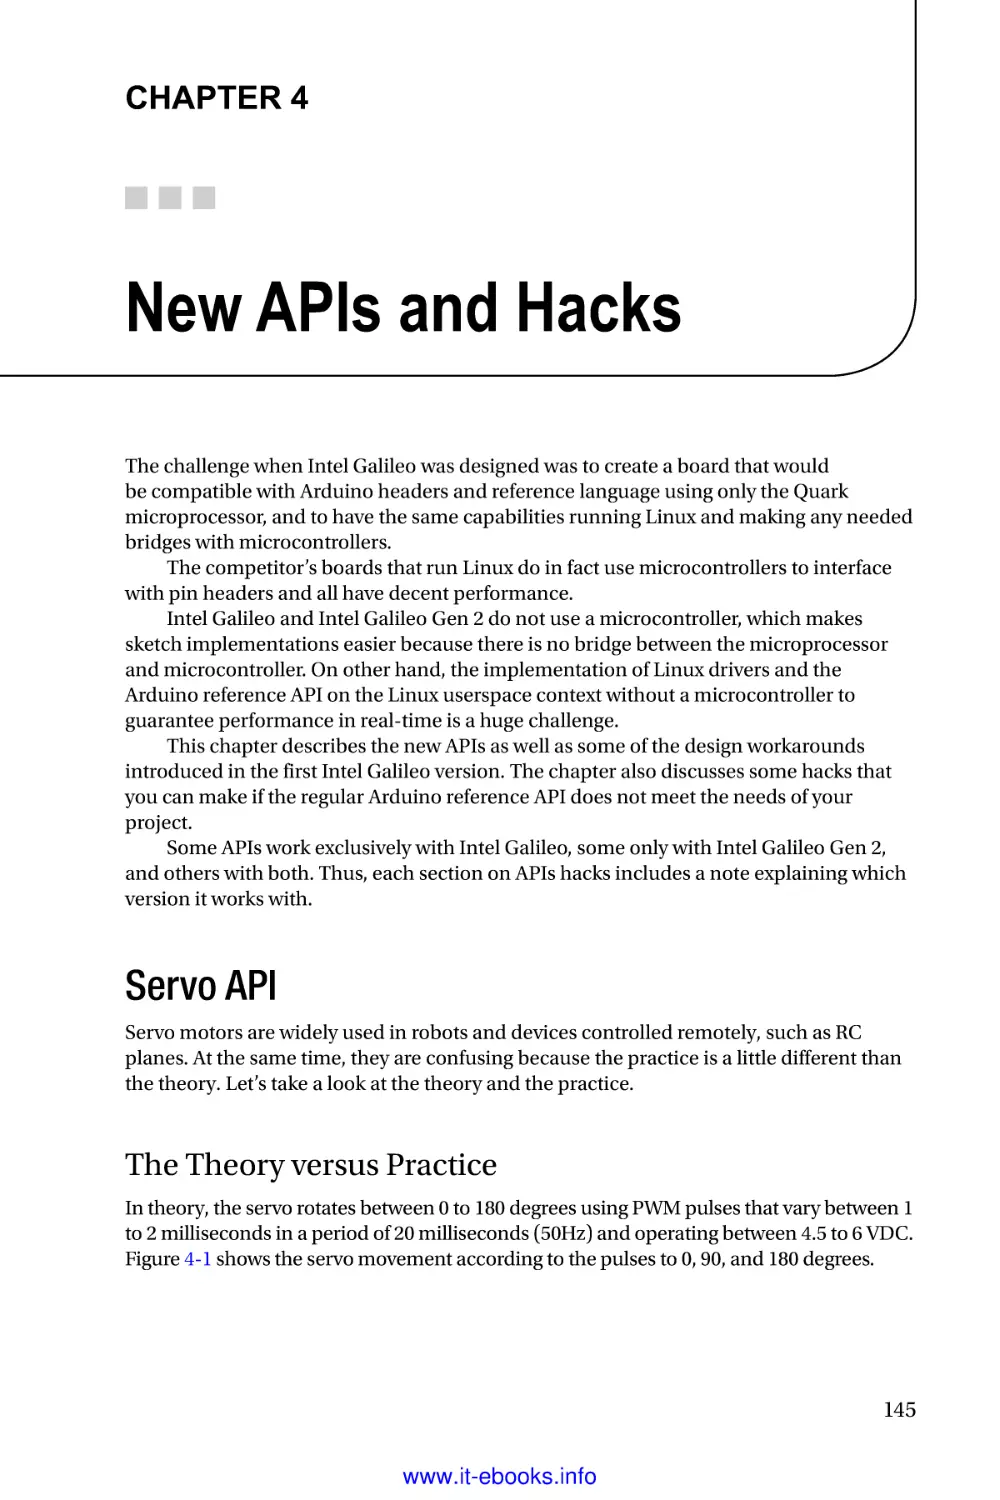 Chapter 4
Servo API
The Theory versus Practice